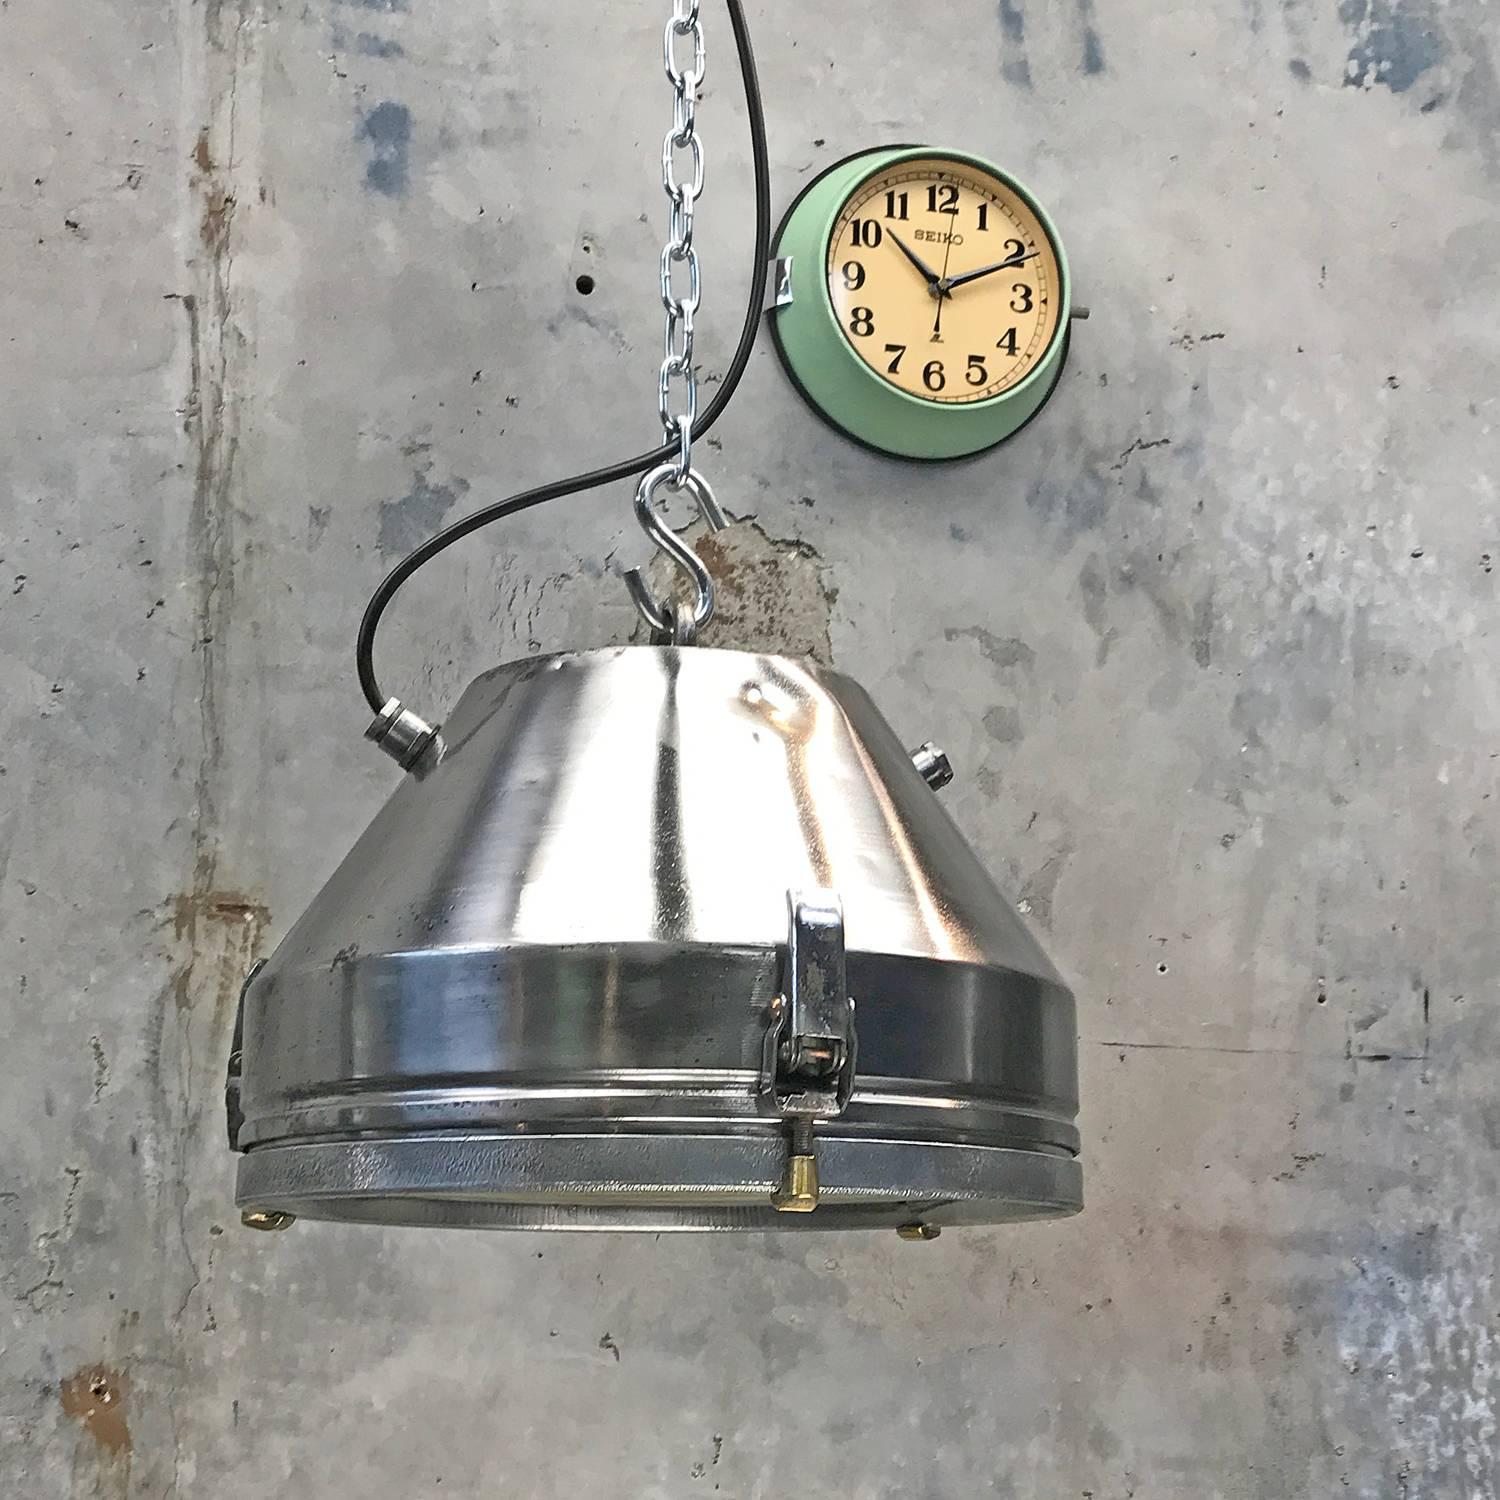 VEB iron and aluminium pendant with target grill.

VEB was formed in he early 1950s and was the biggest luminaire manufacturer in the GDR.

The Publicly Owned Operation (German: Volkseigener Betrieb) was the main legal form of industrial enterprise